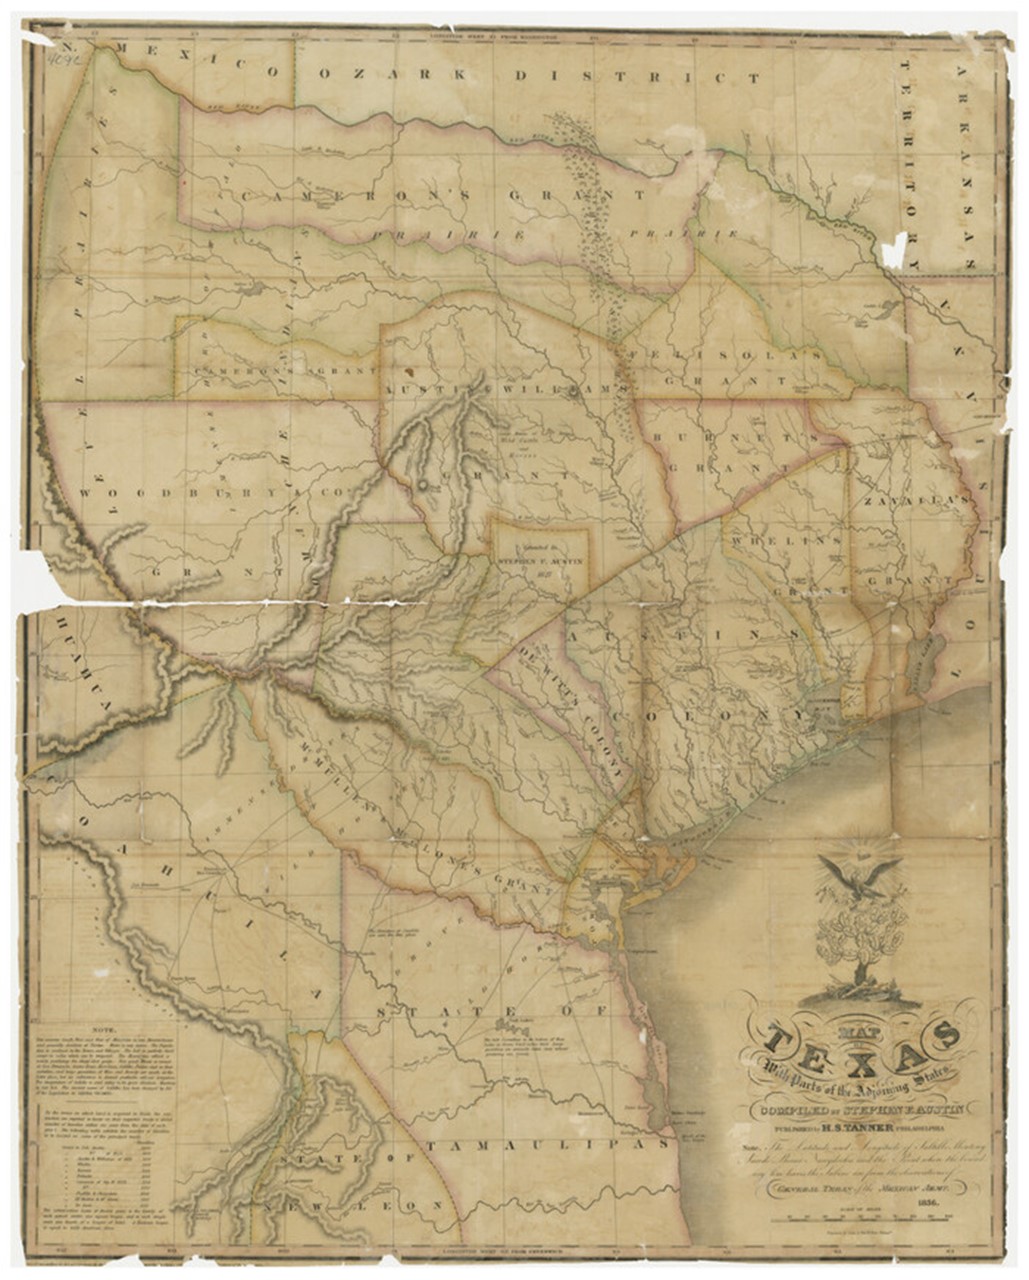 A weathered map of Texas from the 1830s